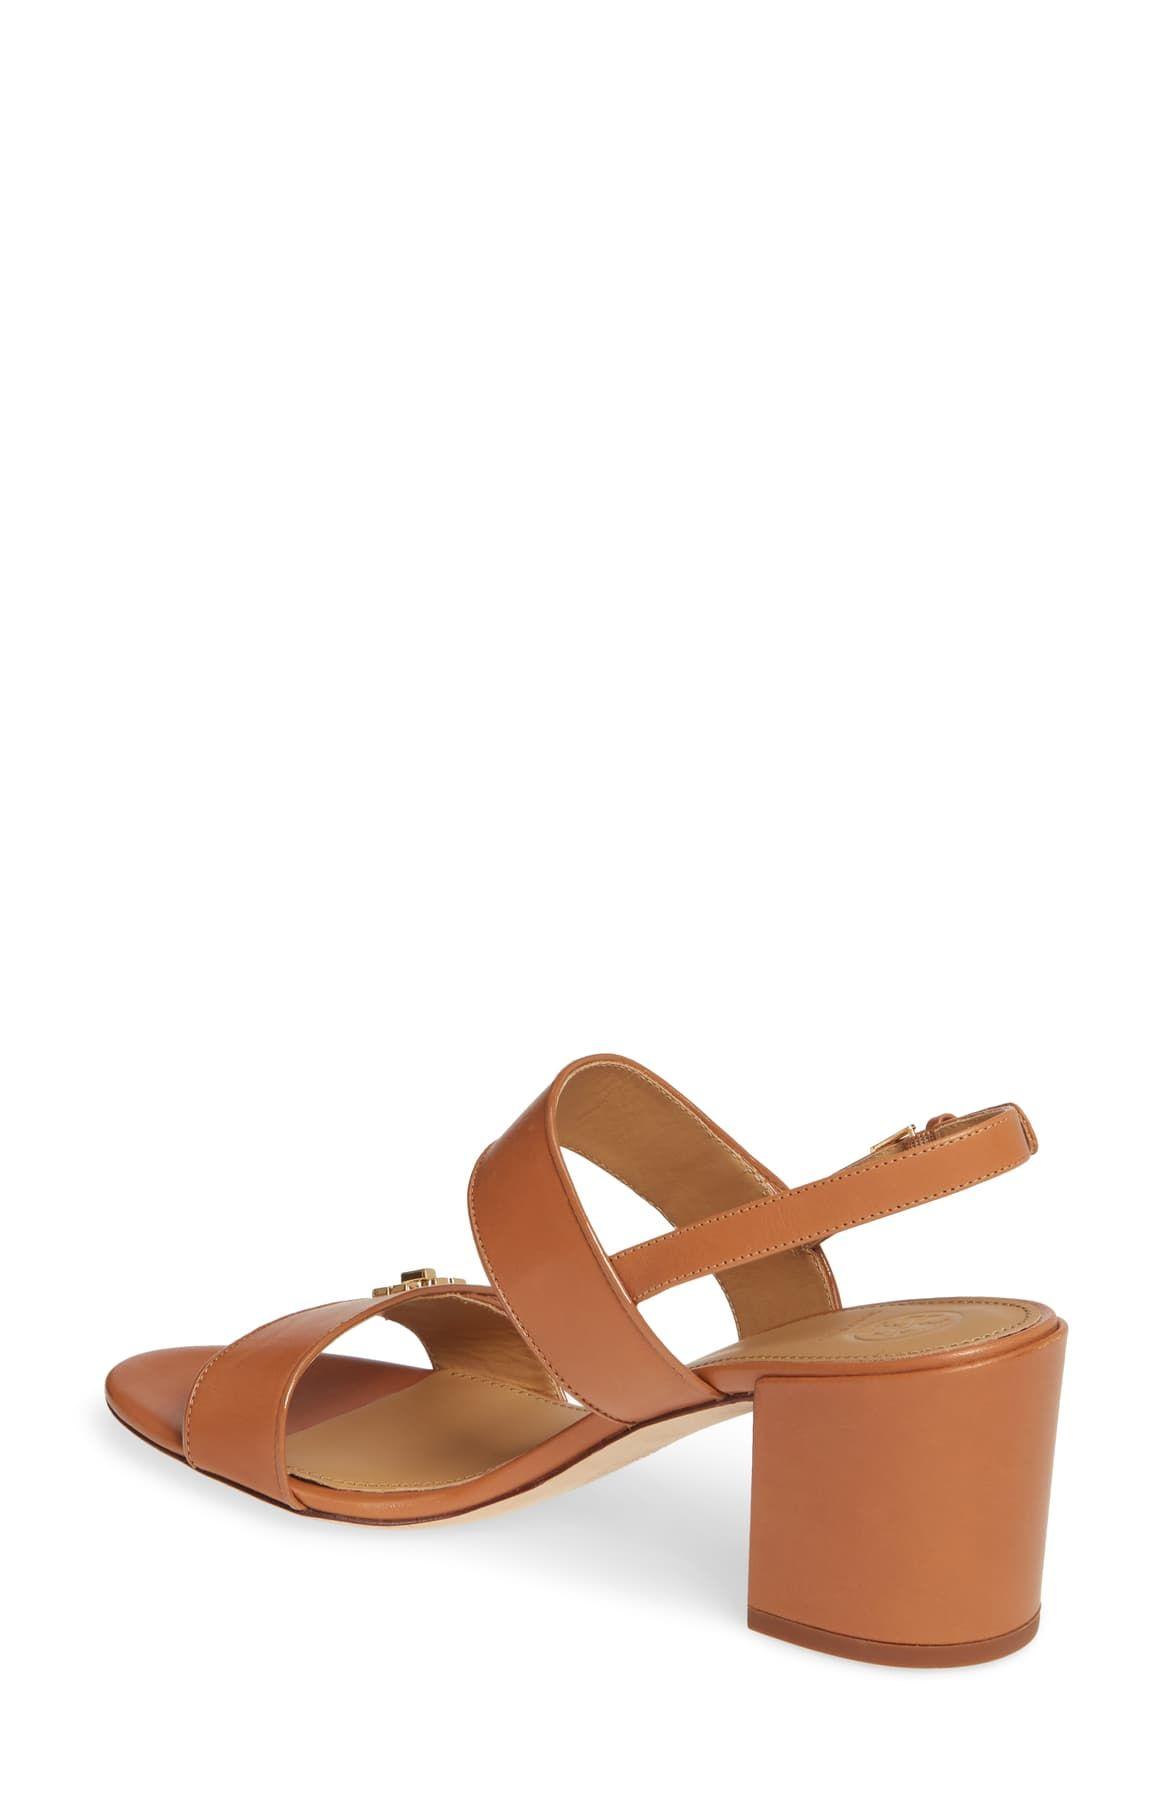 Tory Burch Kira 65mm Two-band Sandal in Brown | Lyst